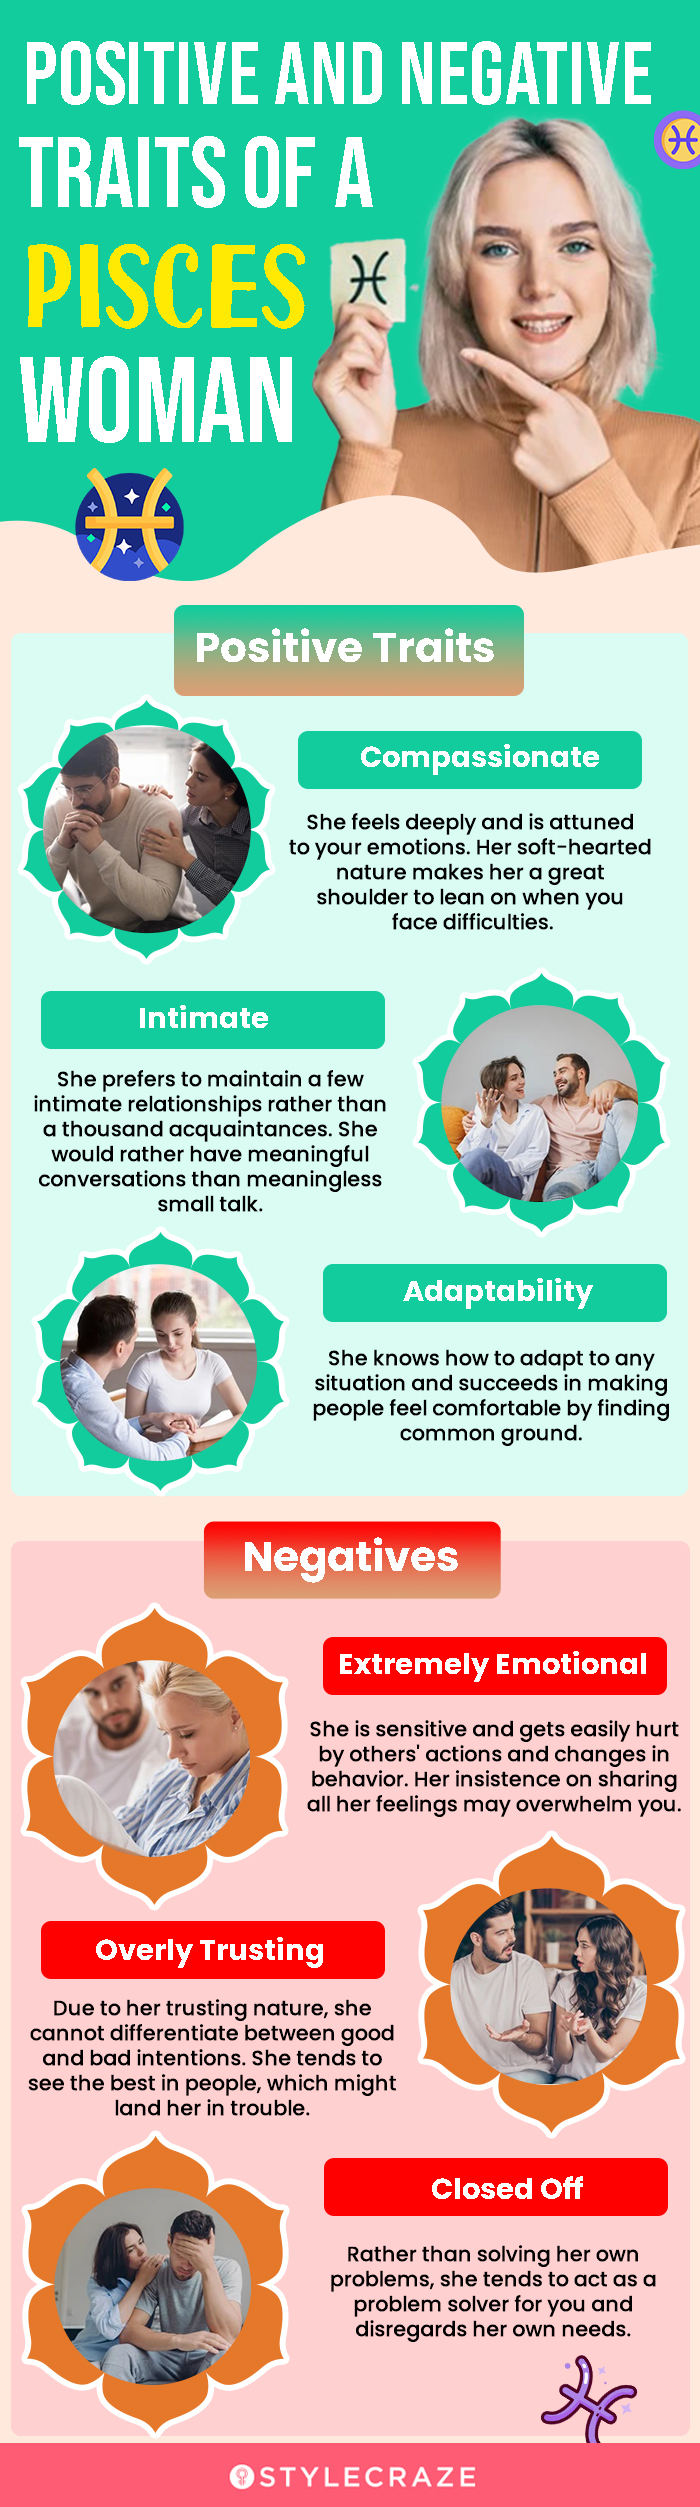 positive and negative traits of a pisces woman (infographic)